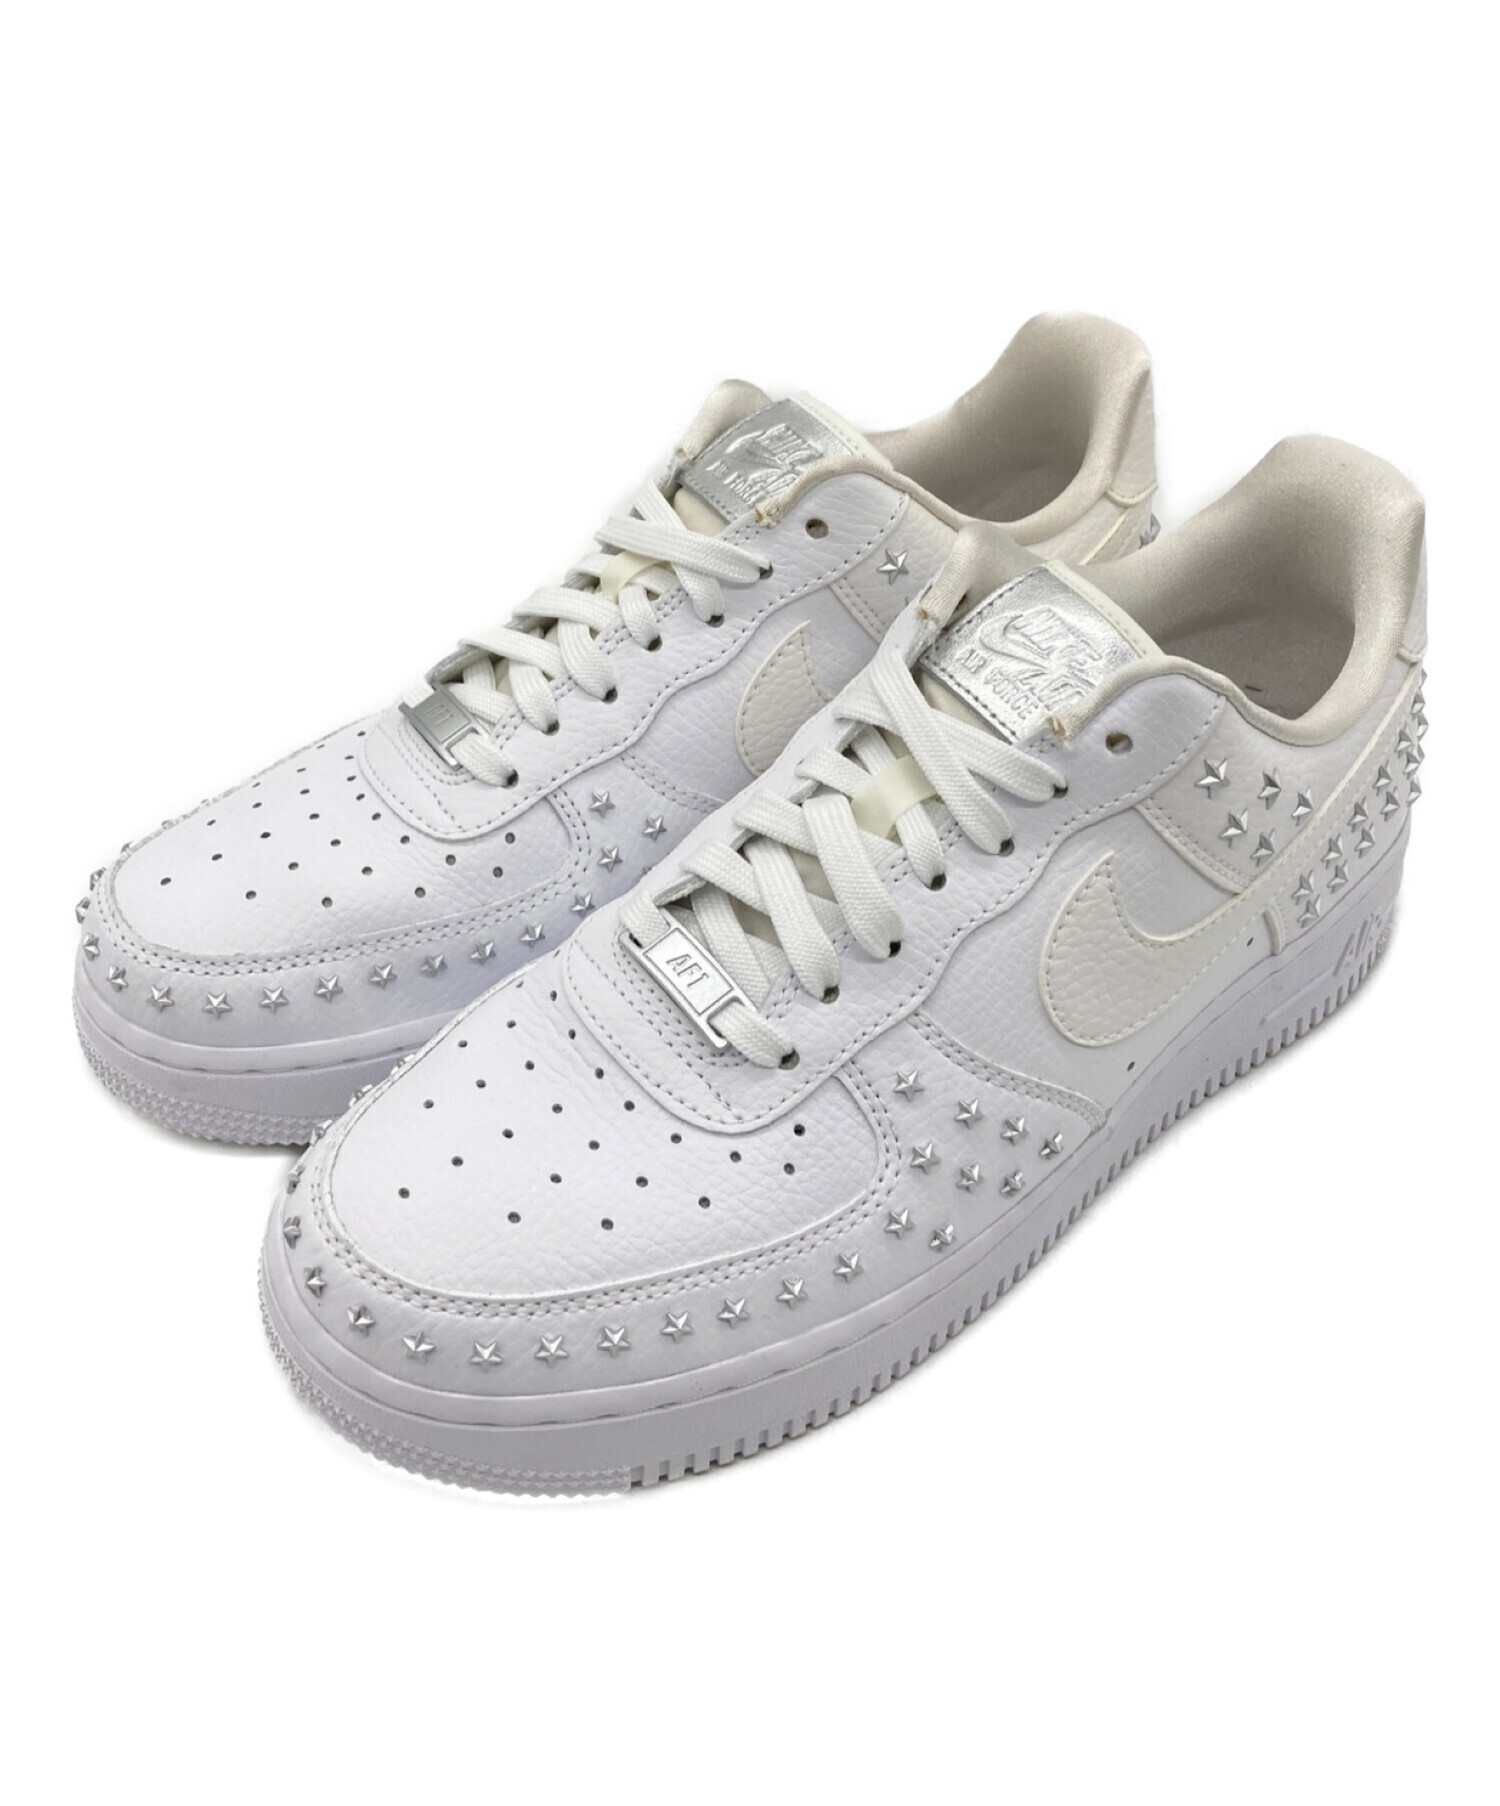 NIKE WMNS AIR FORCE 1 STAR STUDDED